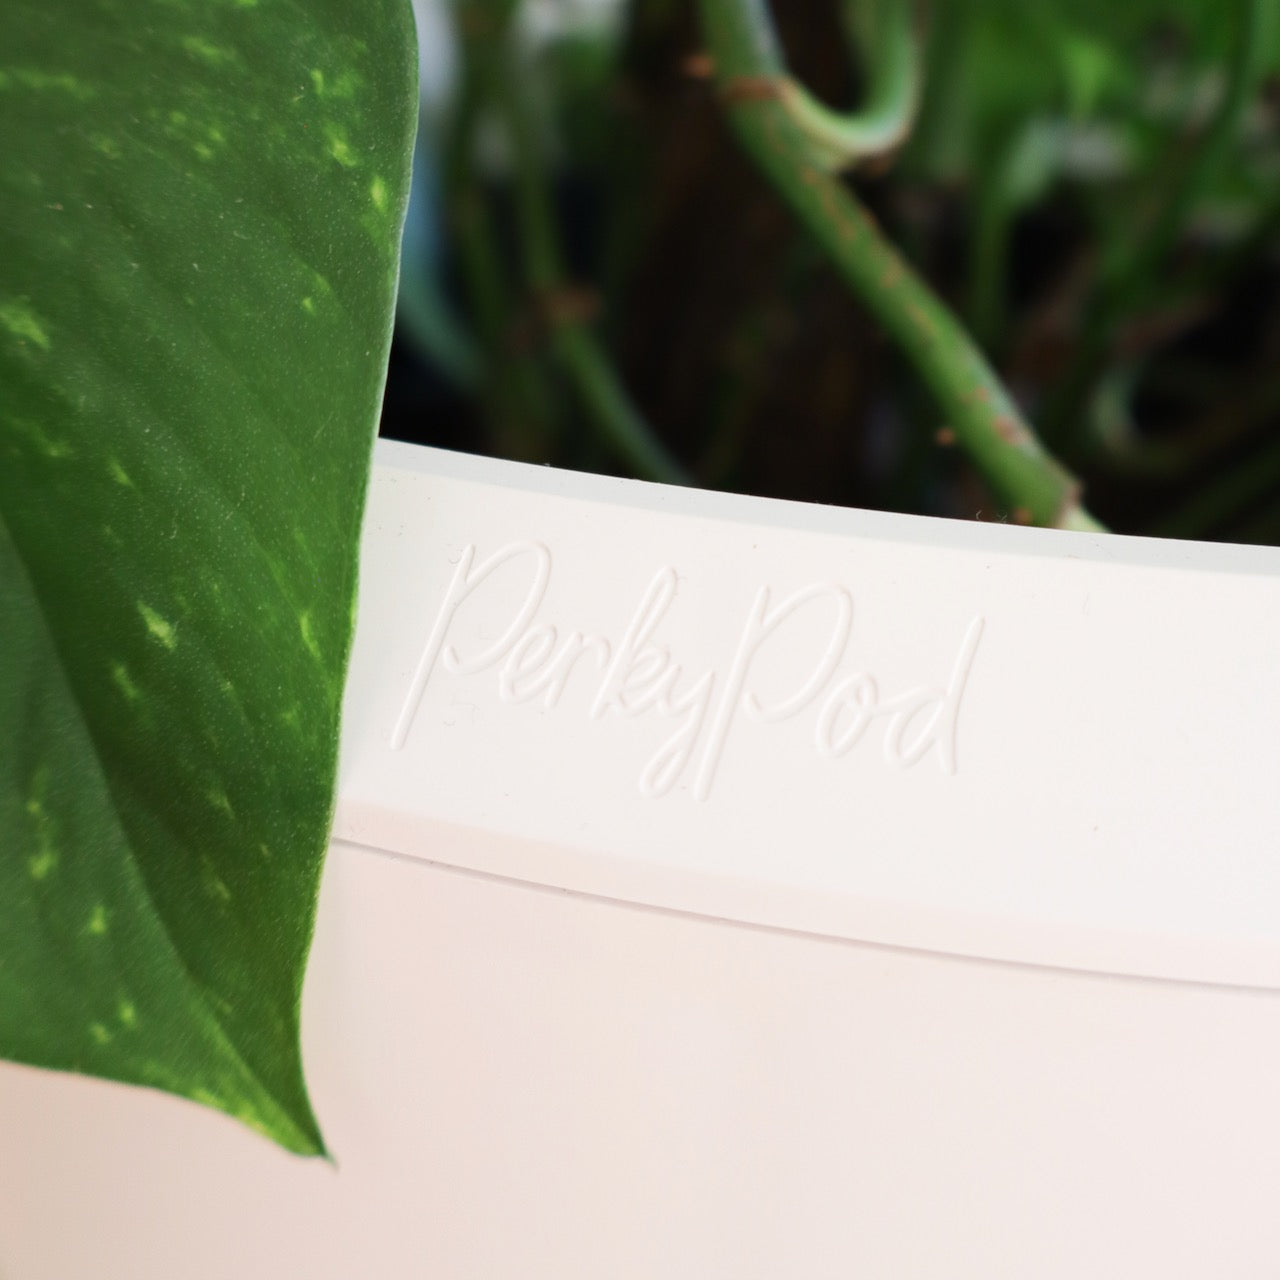 PerkyPod Large White Plant Pot Close up view of Logo on top of pot